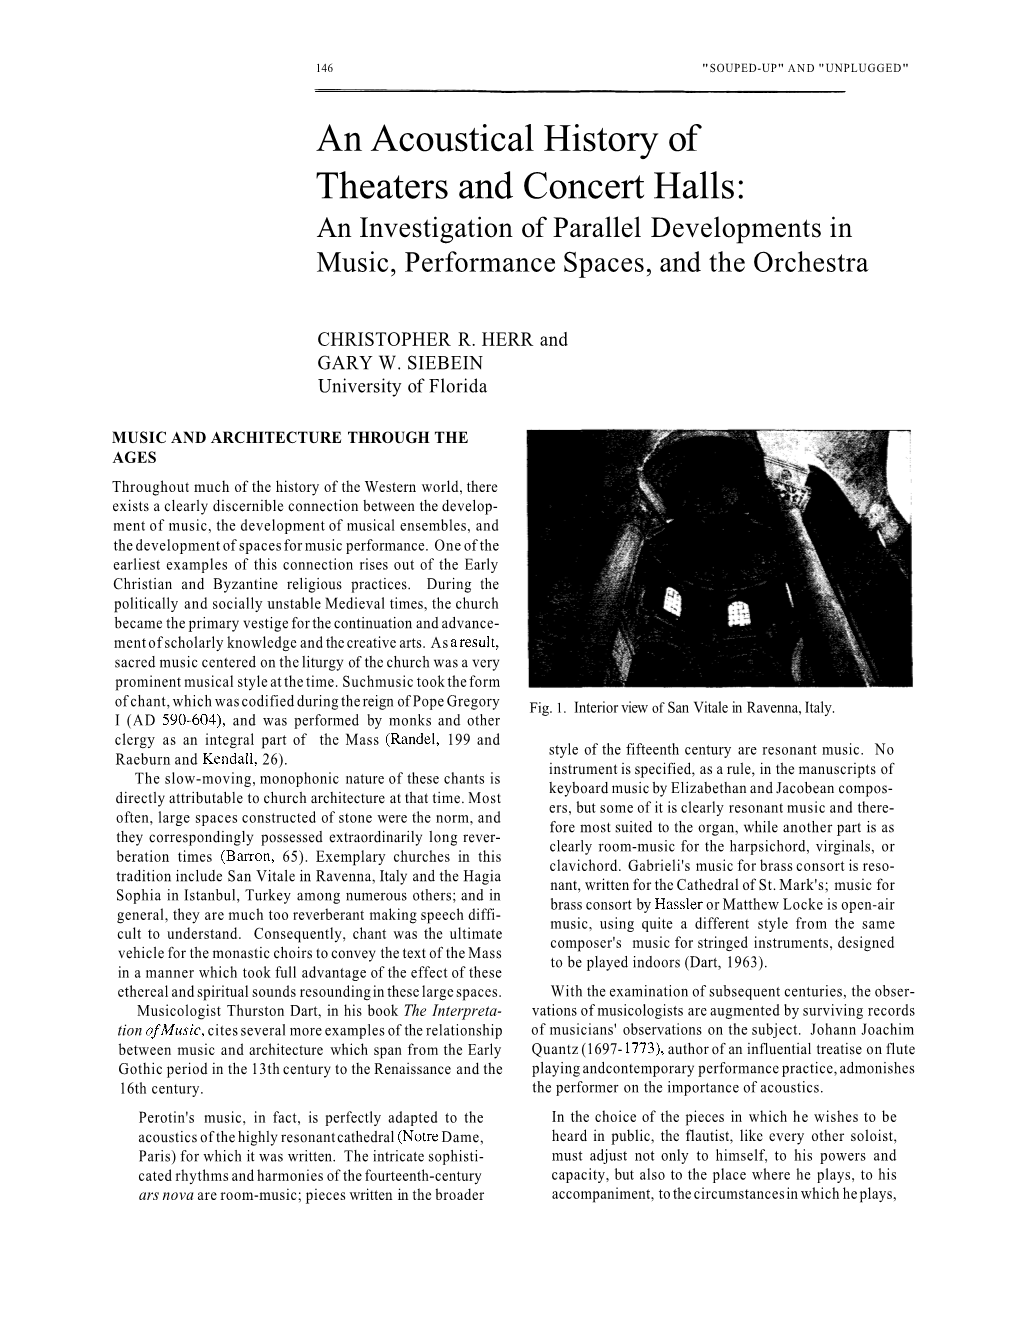 An Acoustical History of Theaters and Concert Halls: an Investigation of Parallel Developments in Music, Performance Spaces, and the Orchestra